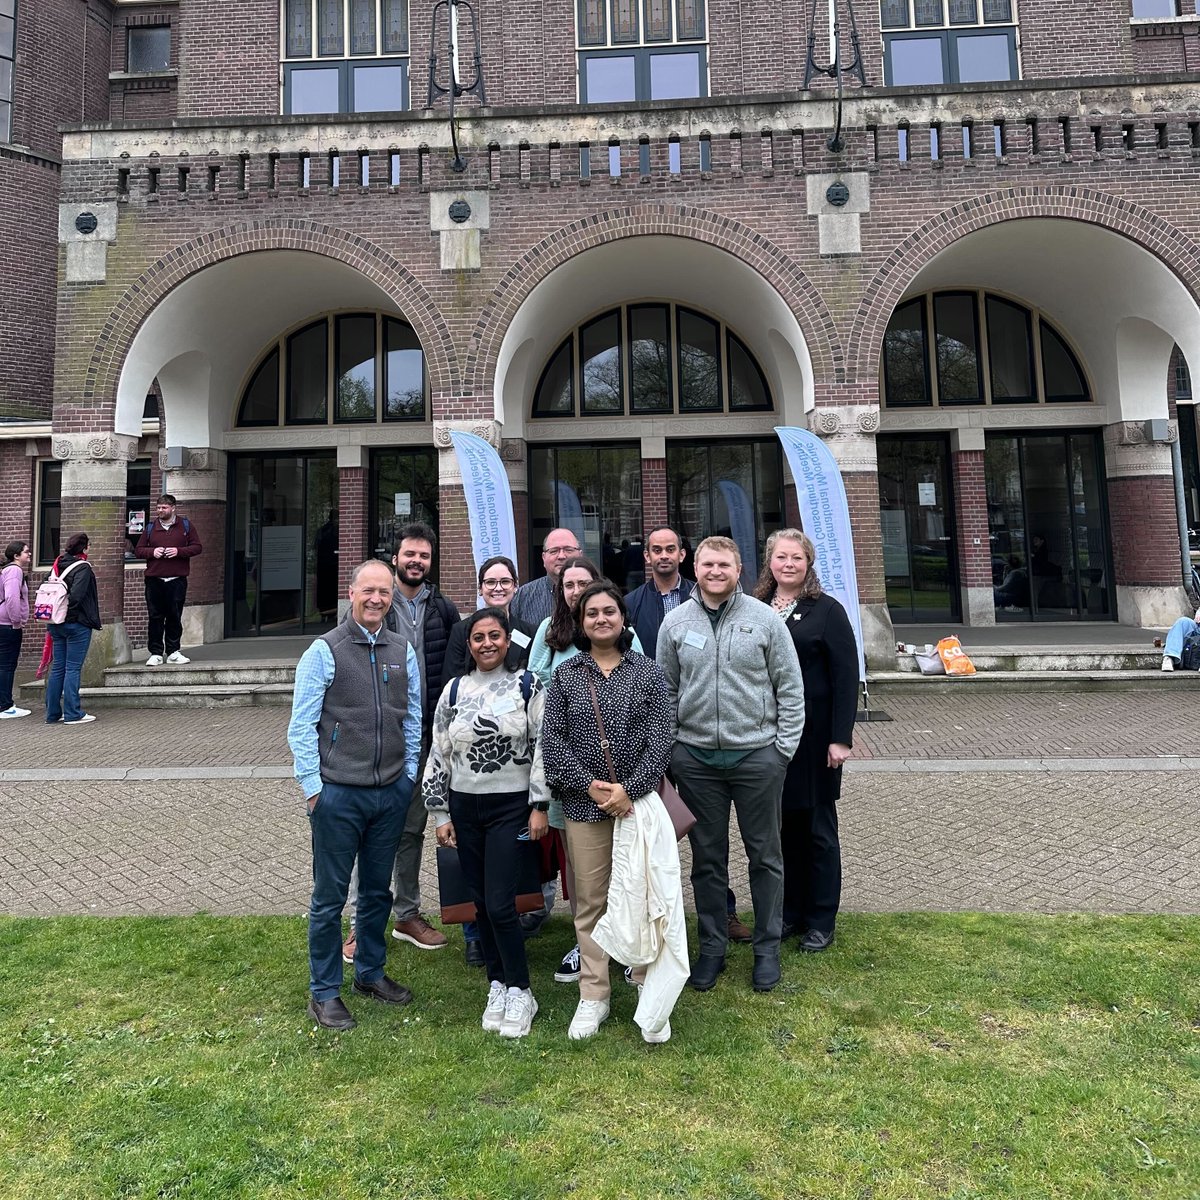 The Berglund #IDMC14 team has been having a great time presenting their work, listening to presentations, and exploring Nijmegen, Netherlands! #TheRNAInstitute #UAlbany